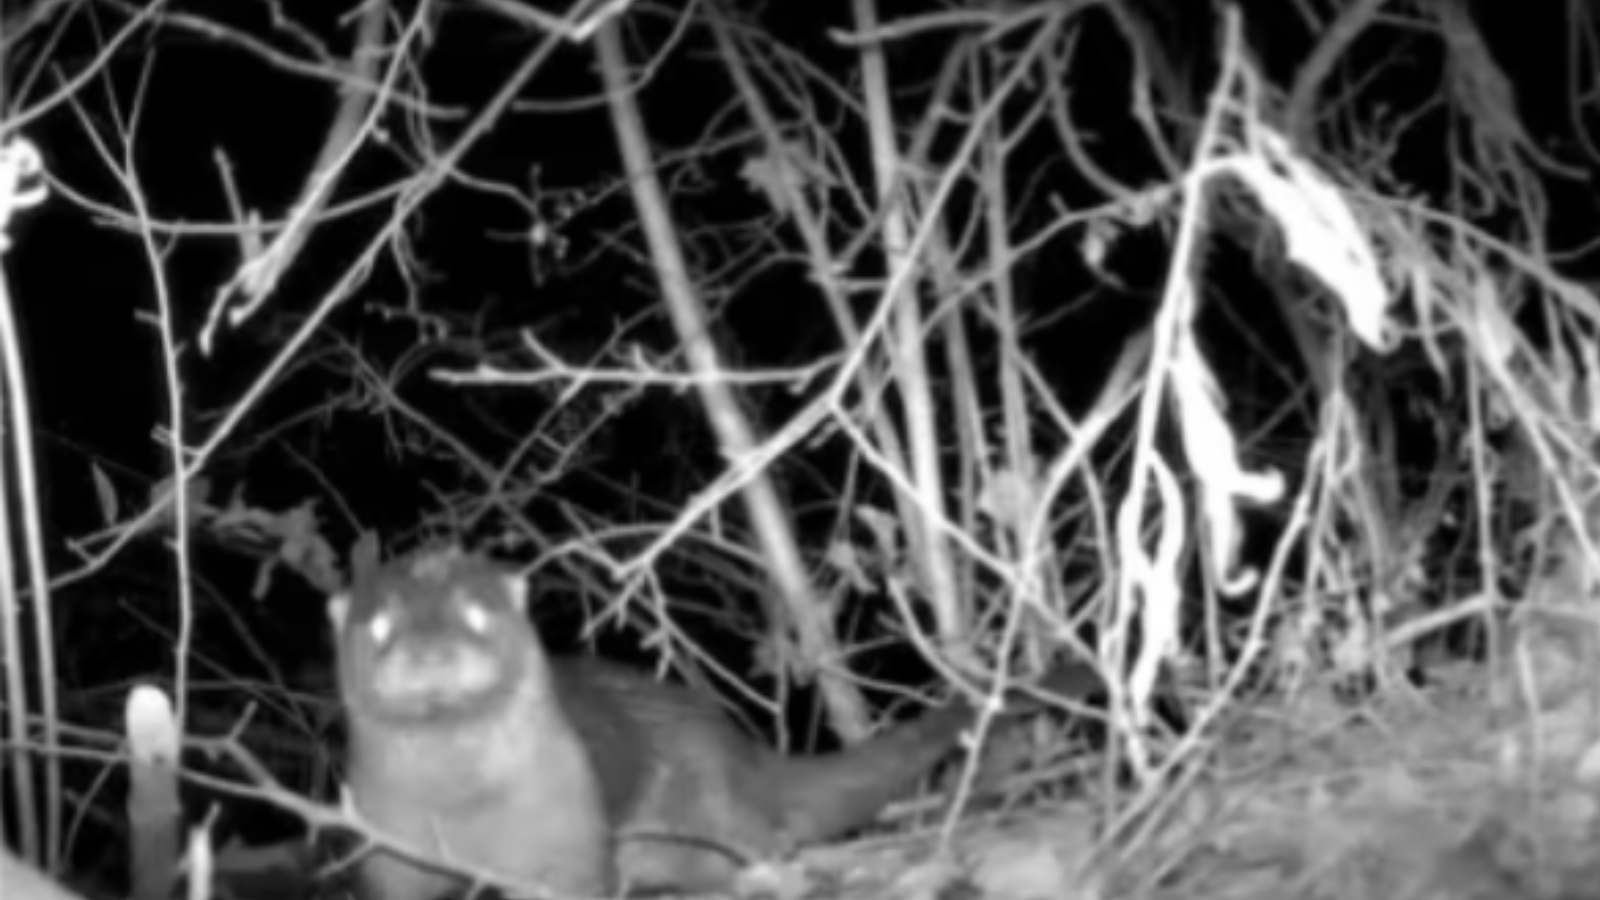 North American River Otter spotted at Ridley Creek for first time in 100 years